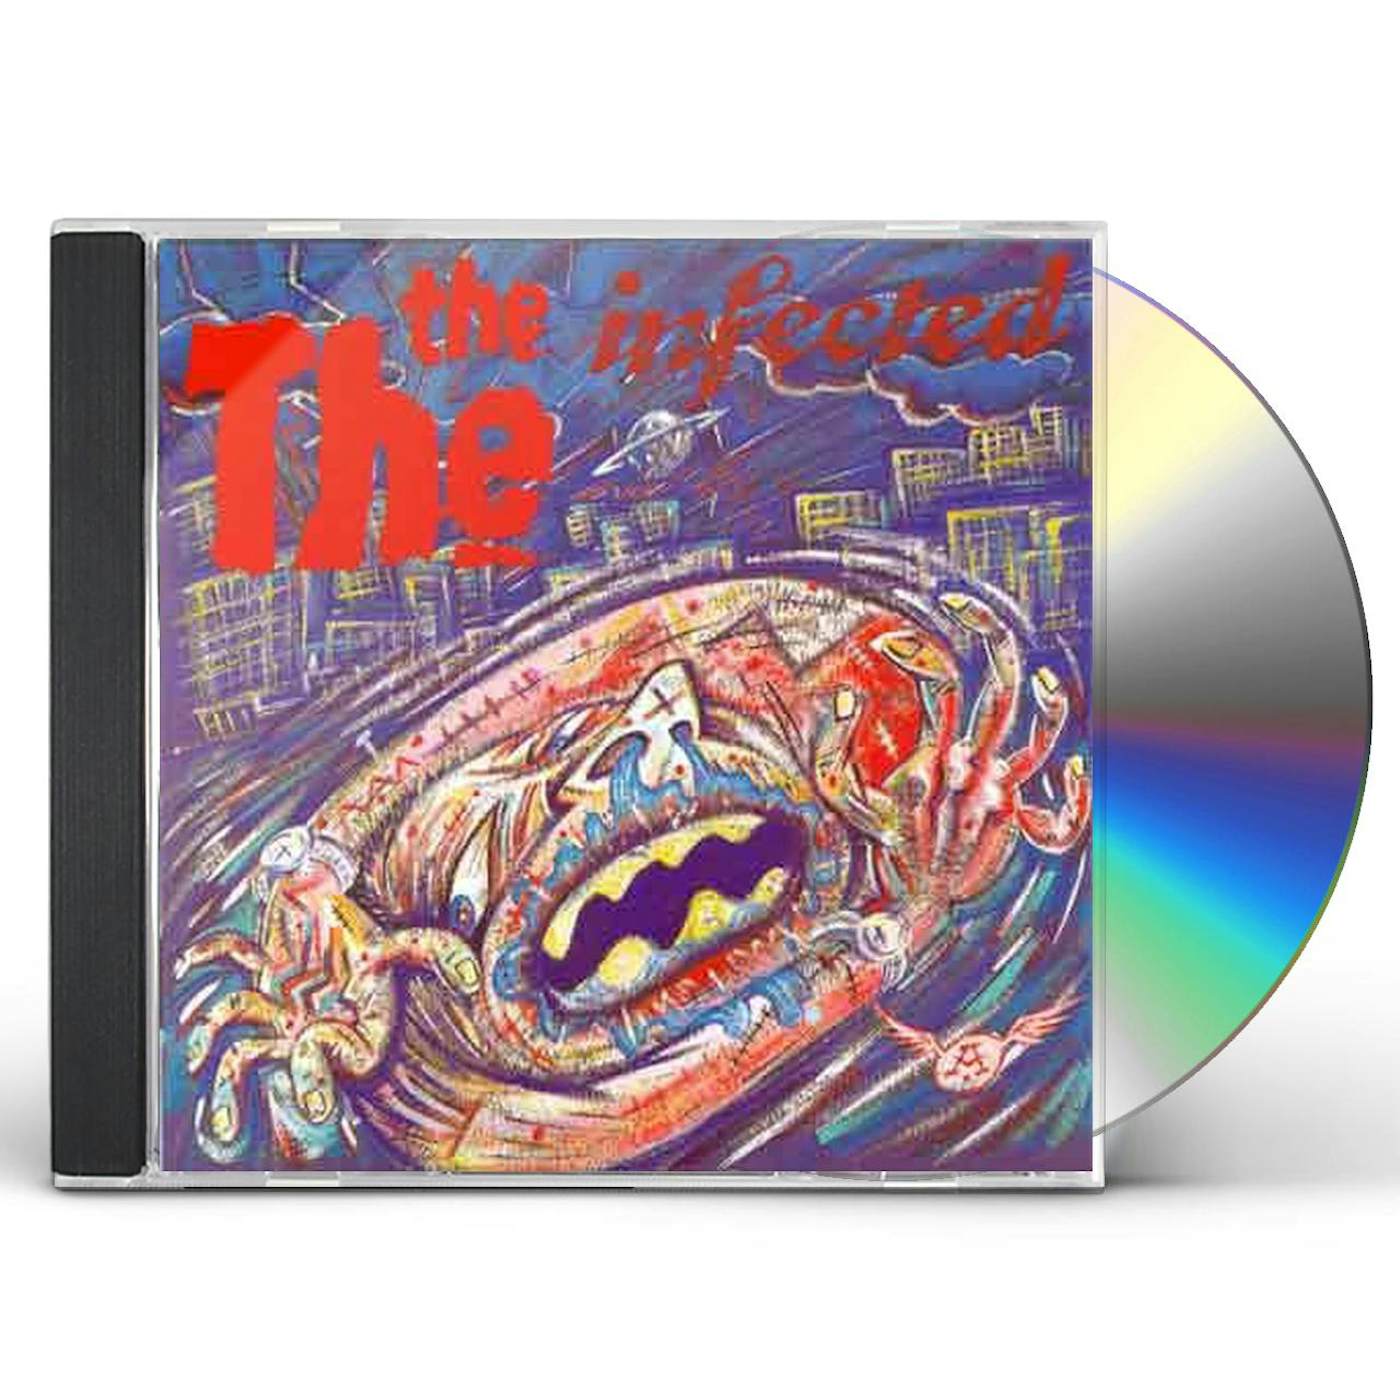 The The INFECTED CD